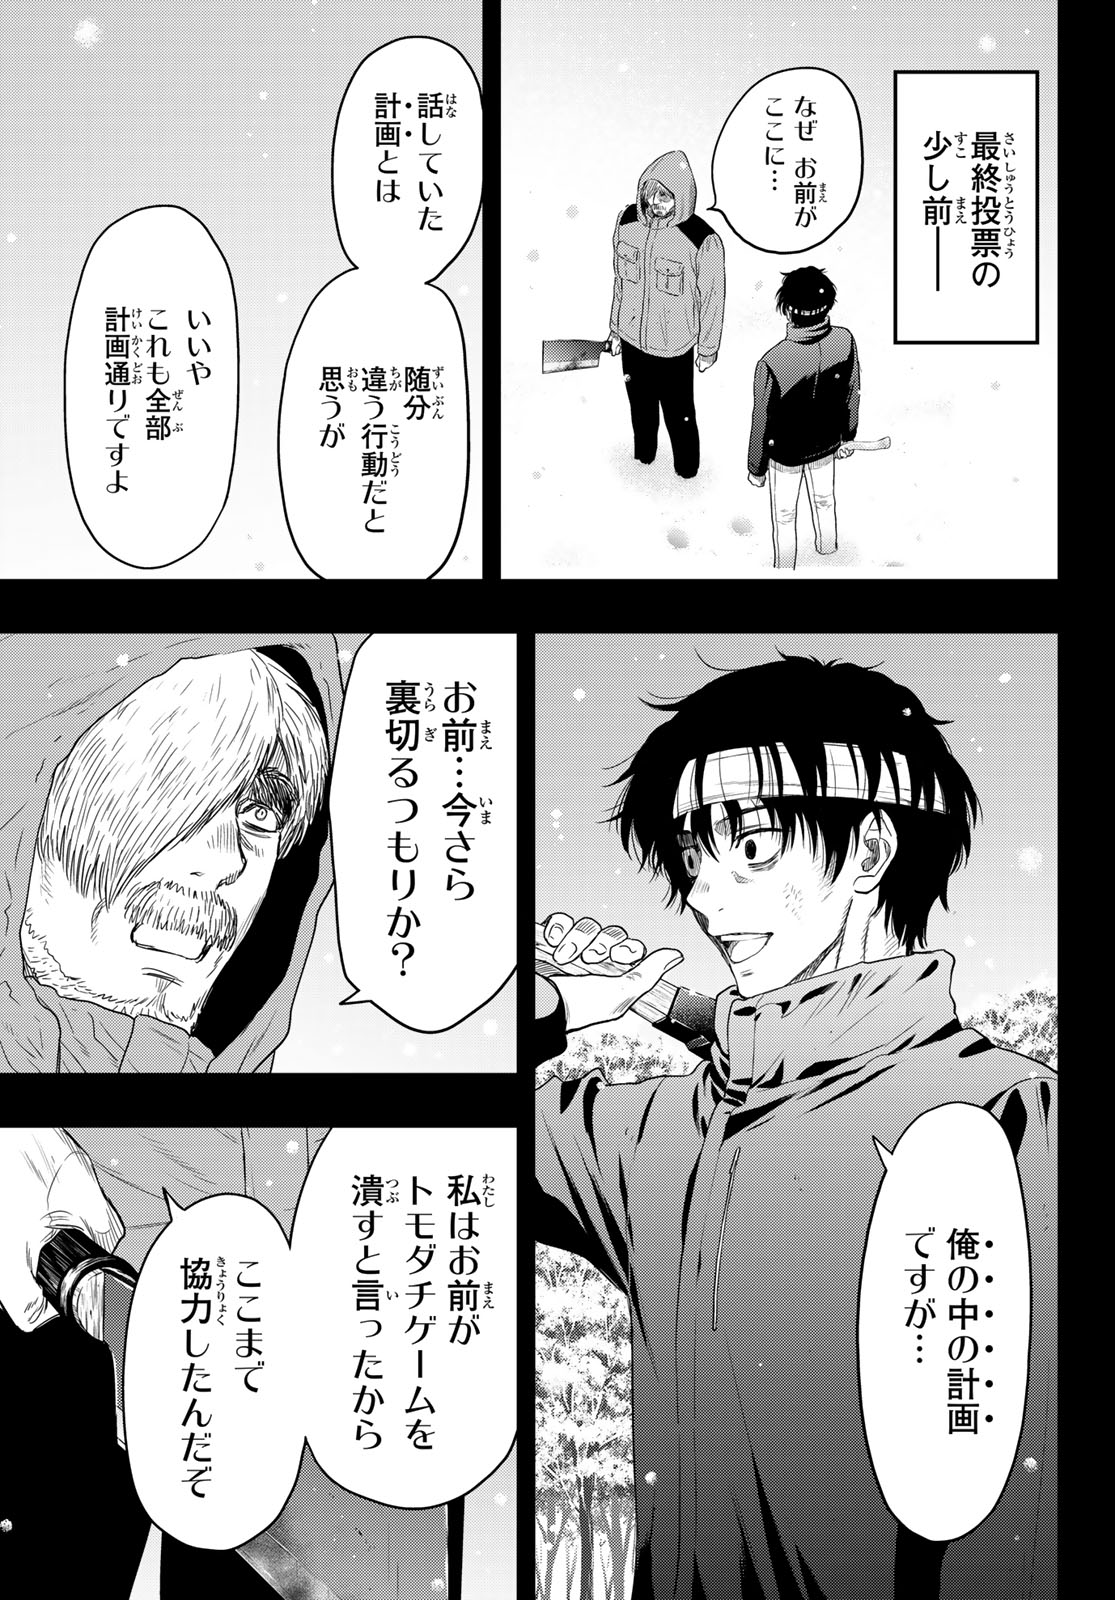 Tomodachi Game (Friends Games) - Chapter 126 - Page 3